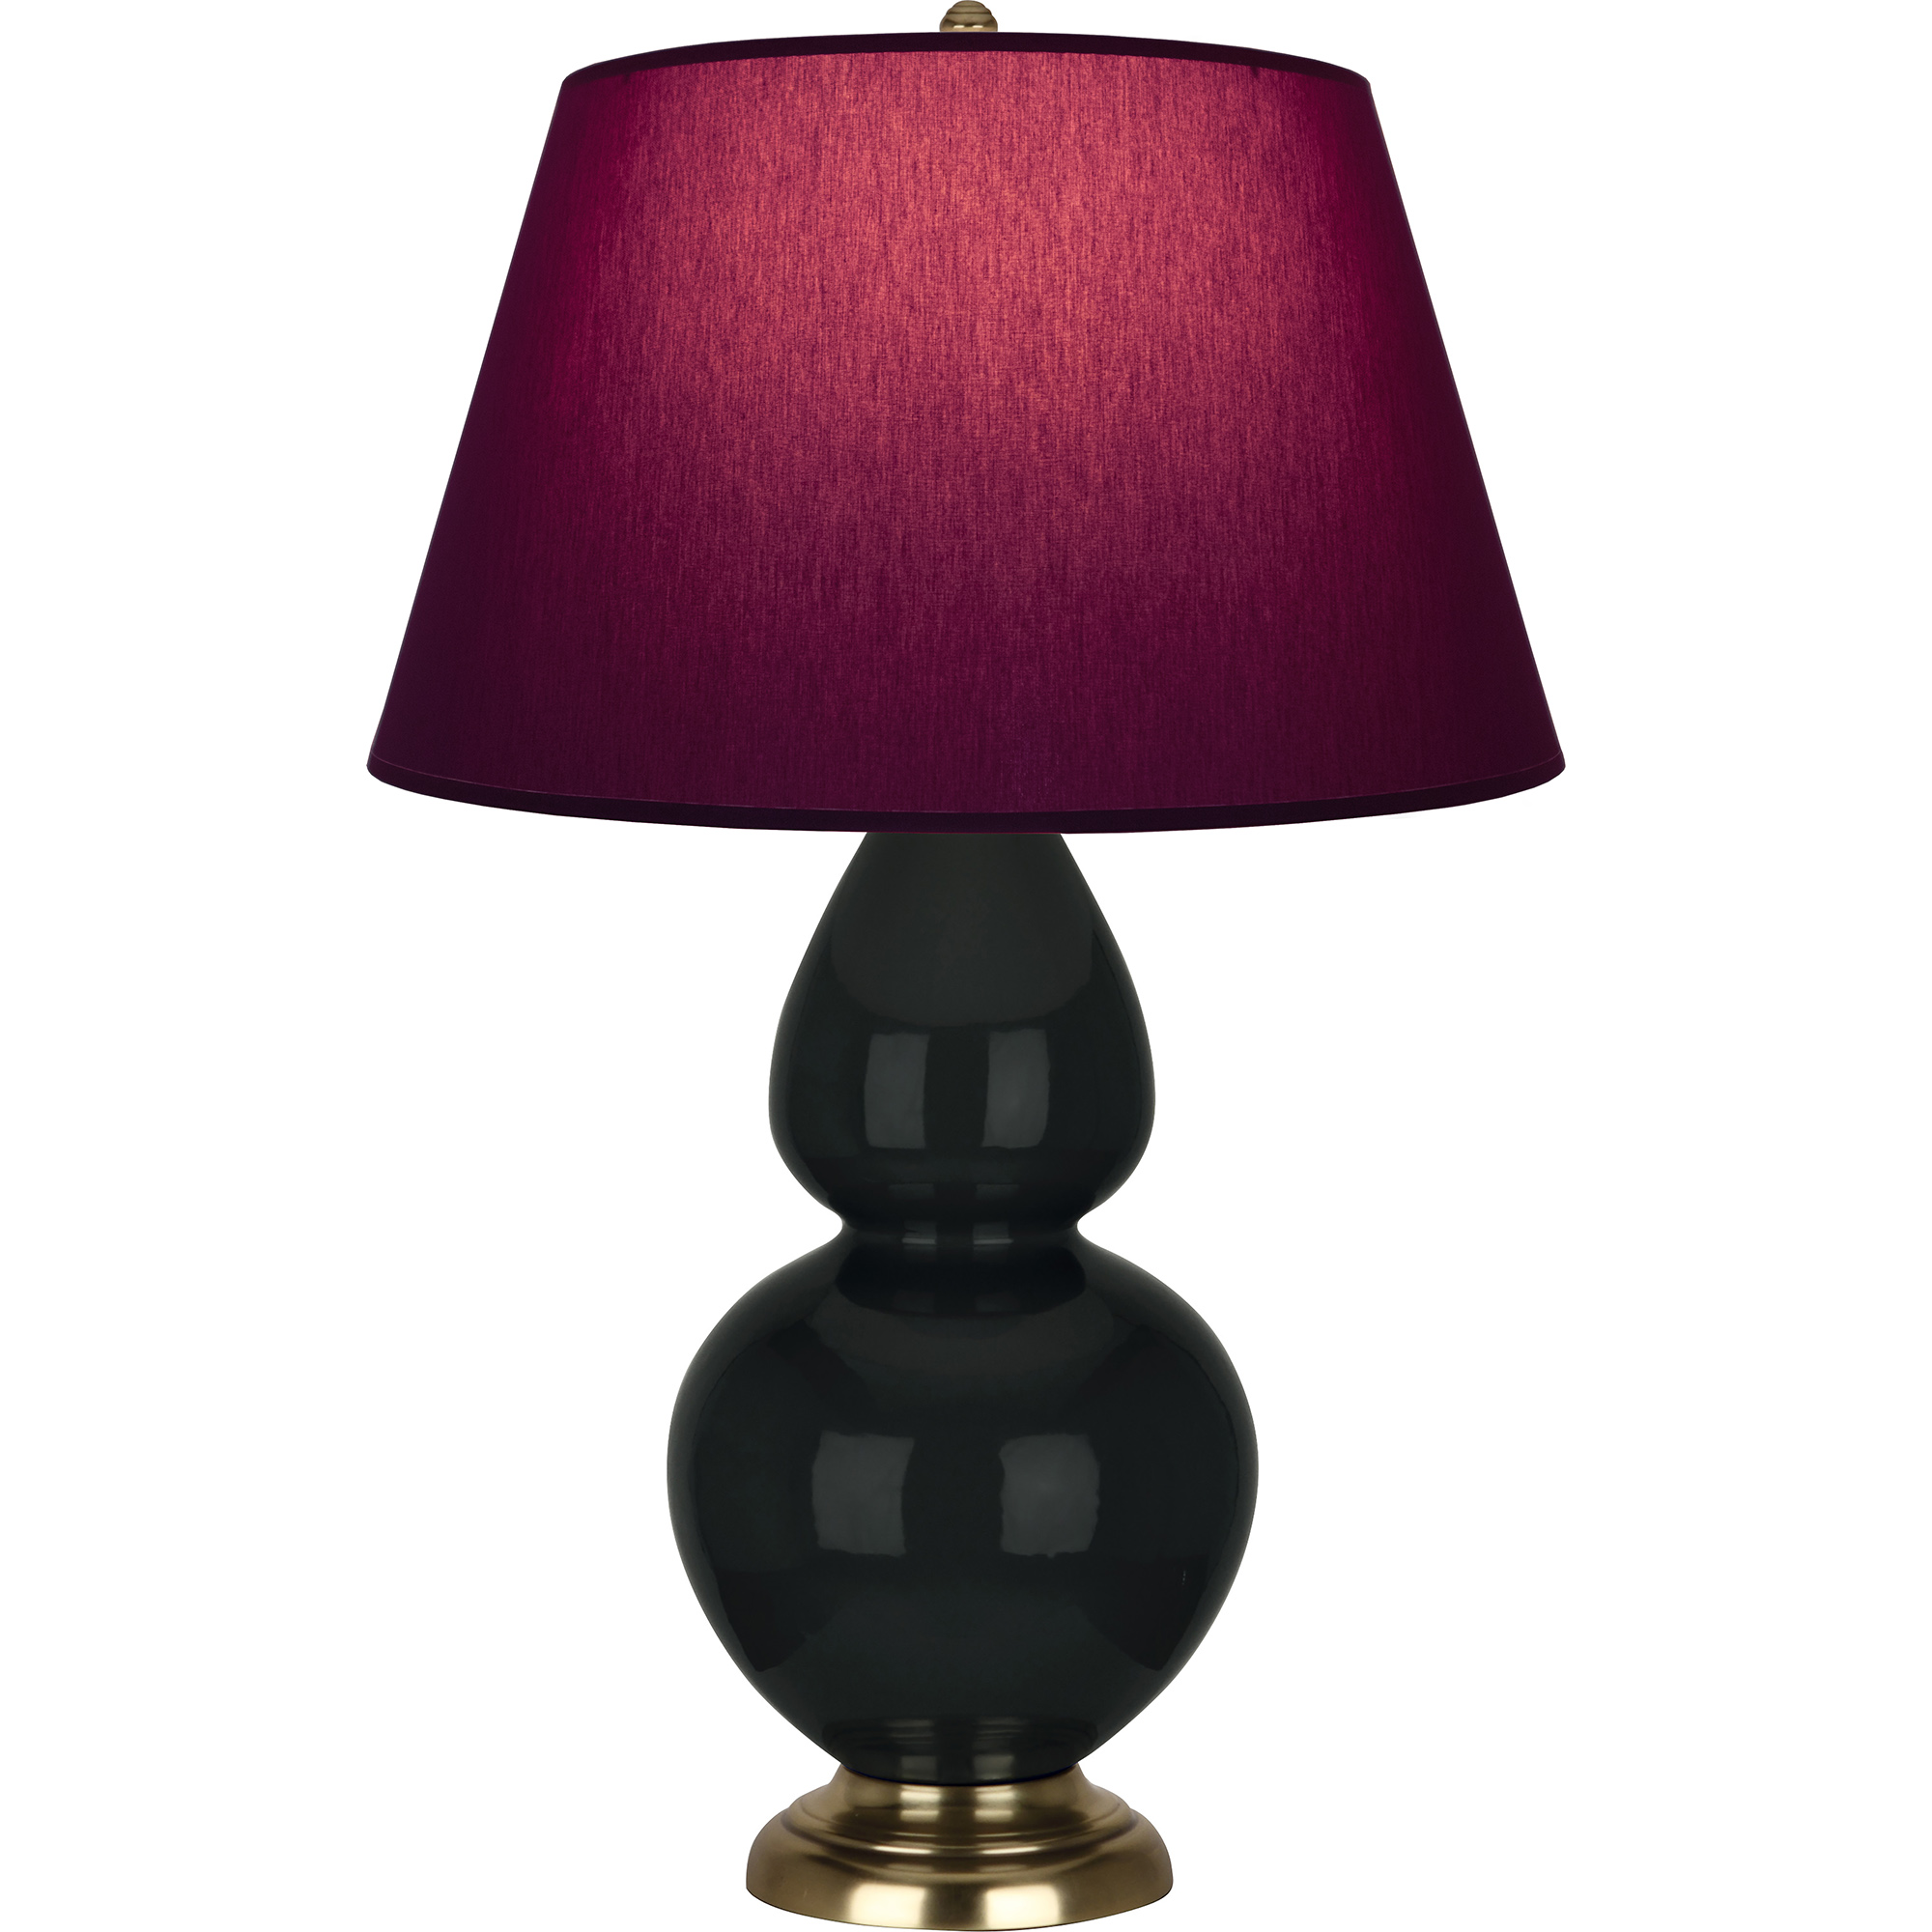 Double Gourd Table Lamp Style #OS20P